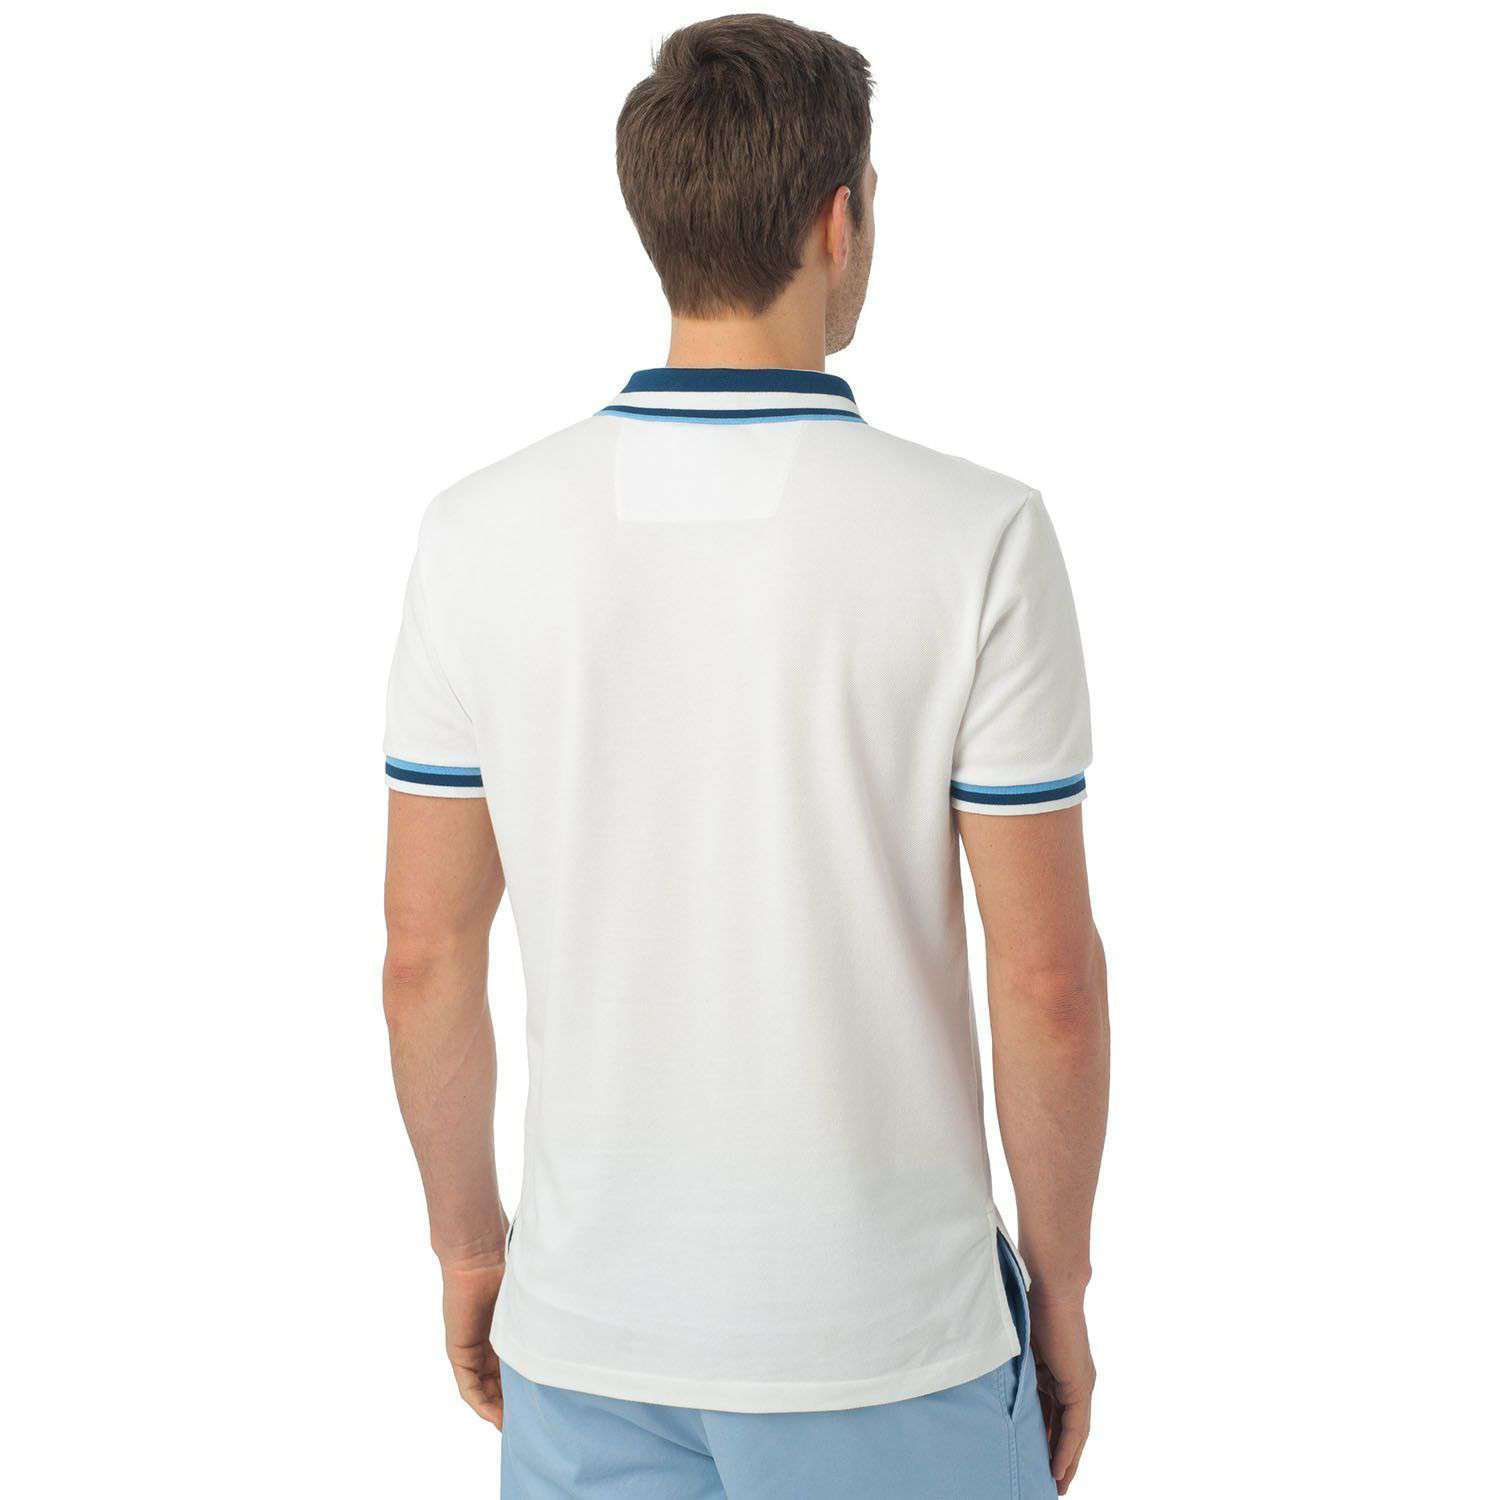 Bay Blue Tipped Polo in Classic White by Southern Tide - Country Club Prep